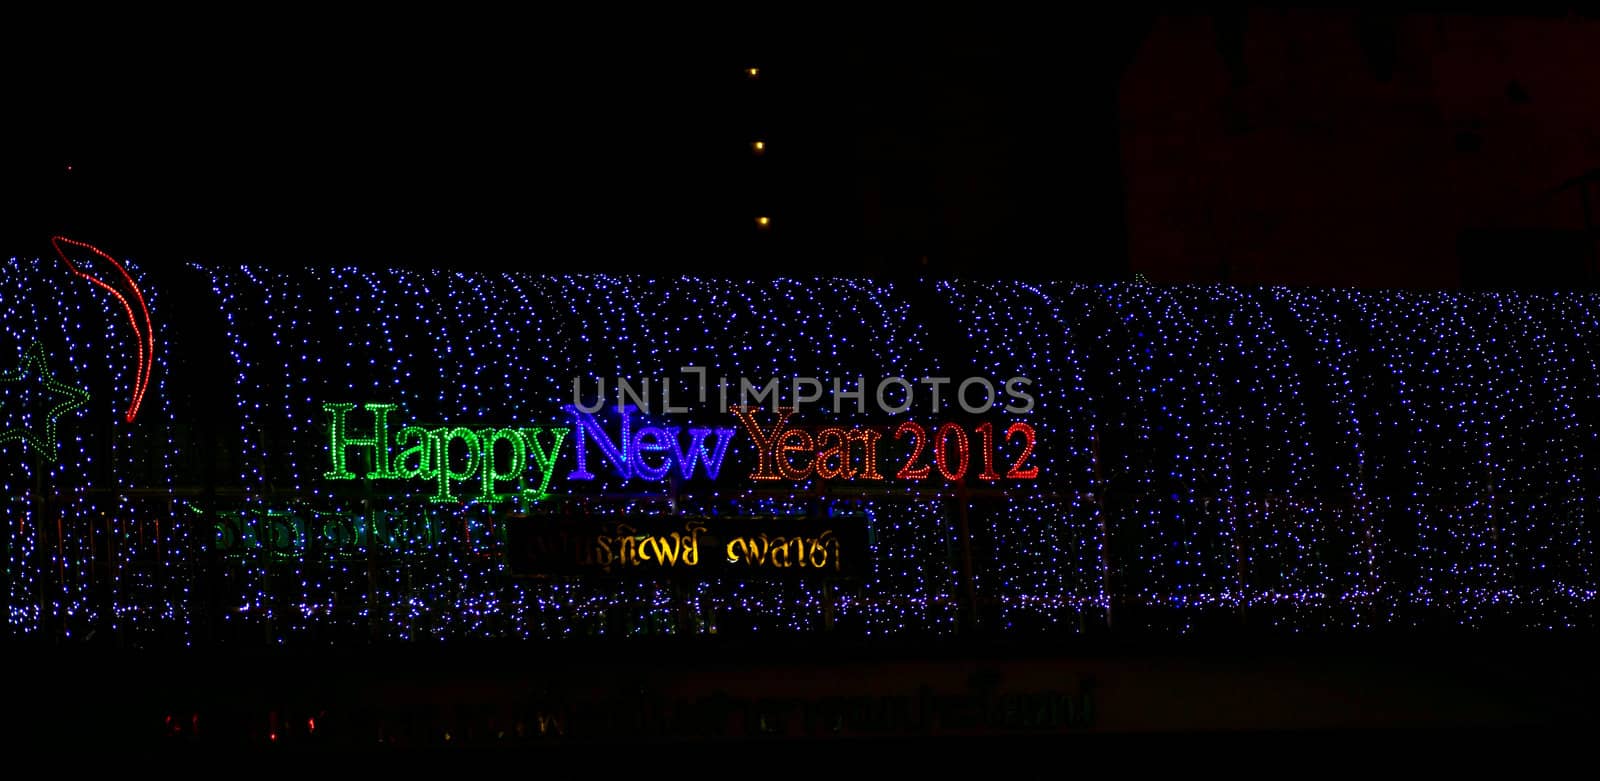 Happy new year 2012 message from neon lights